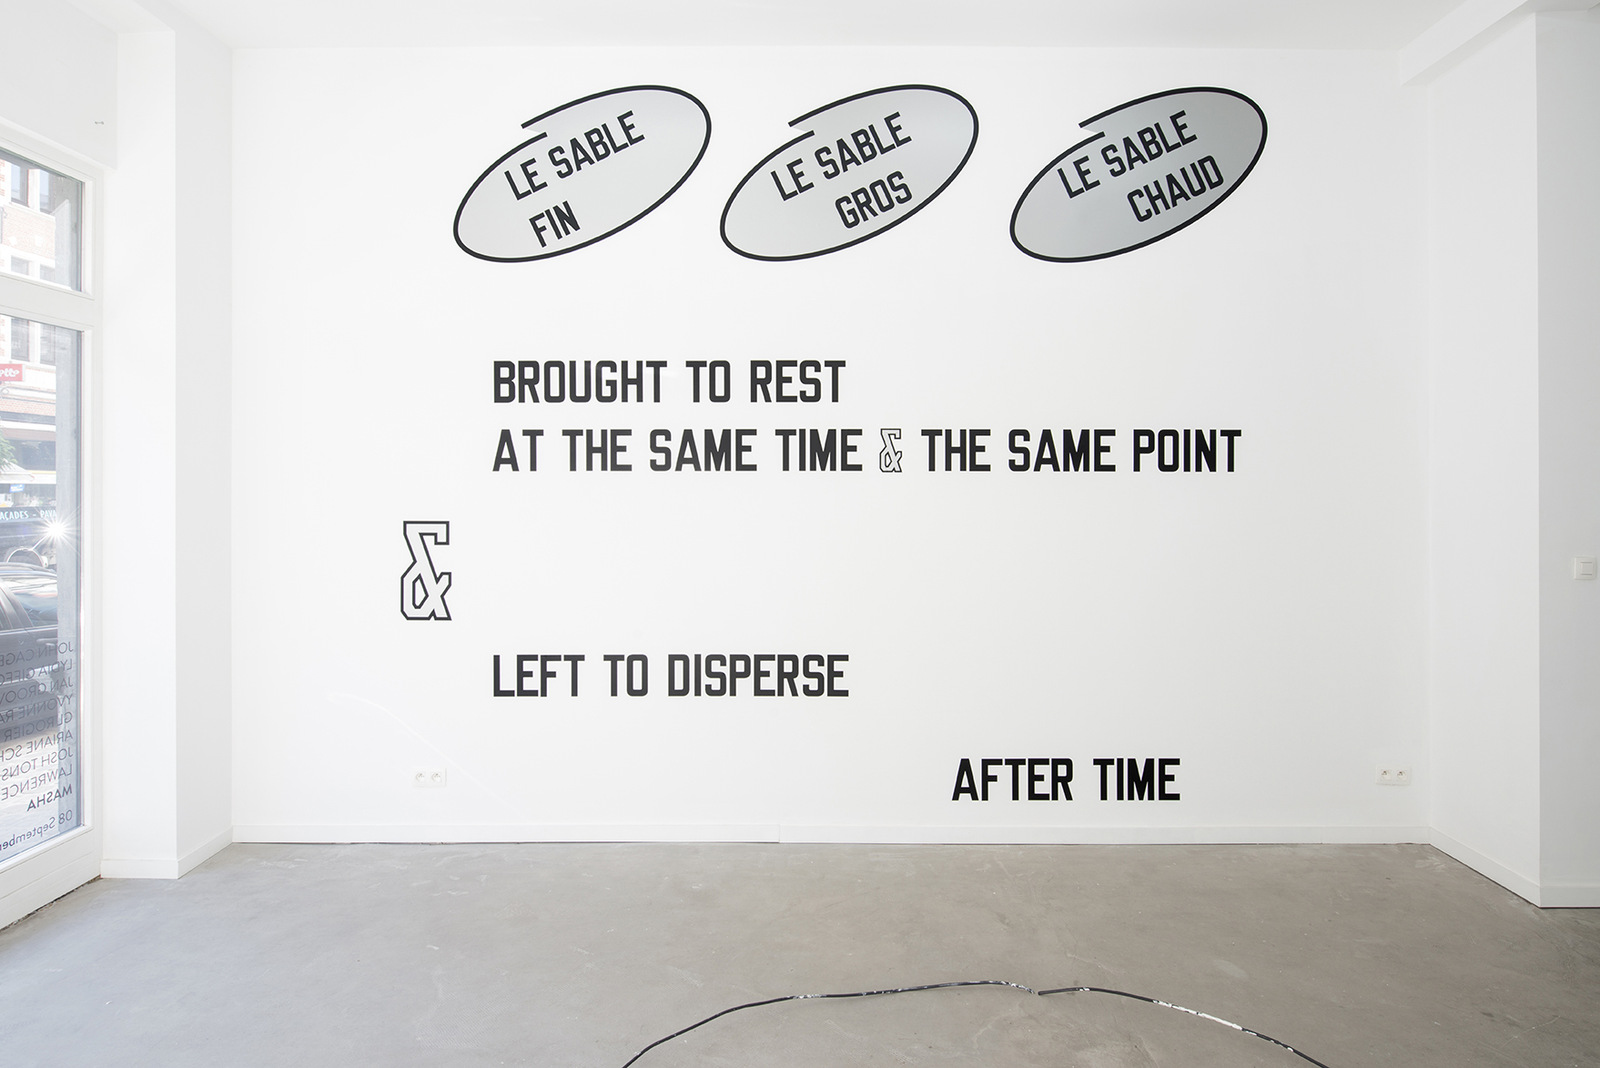 Lawrence Weiner, 'Le sable fin, le sable gros, le sable chaud, brought to rest at the same time & the same point & left to disperse after time', 2008